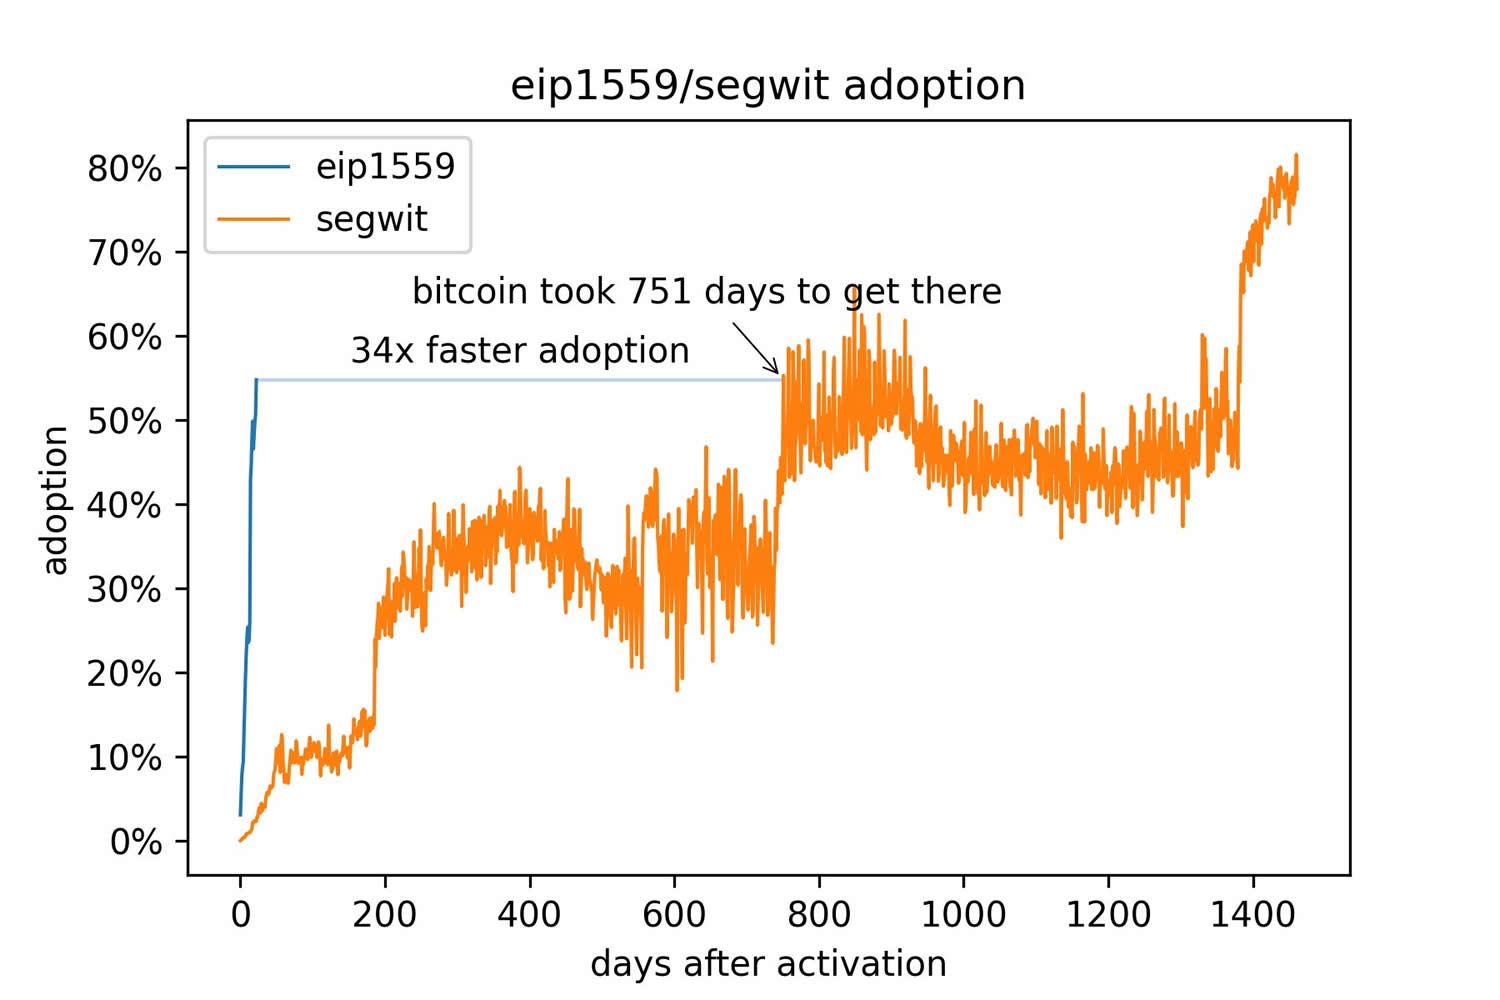  ethereum bitcoin segwit upgrade 34x adopted faster 